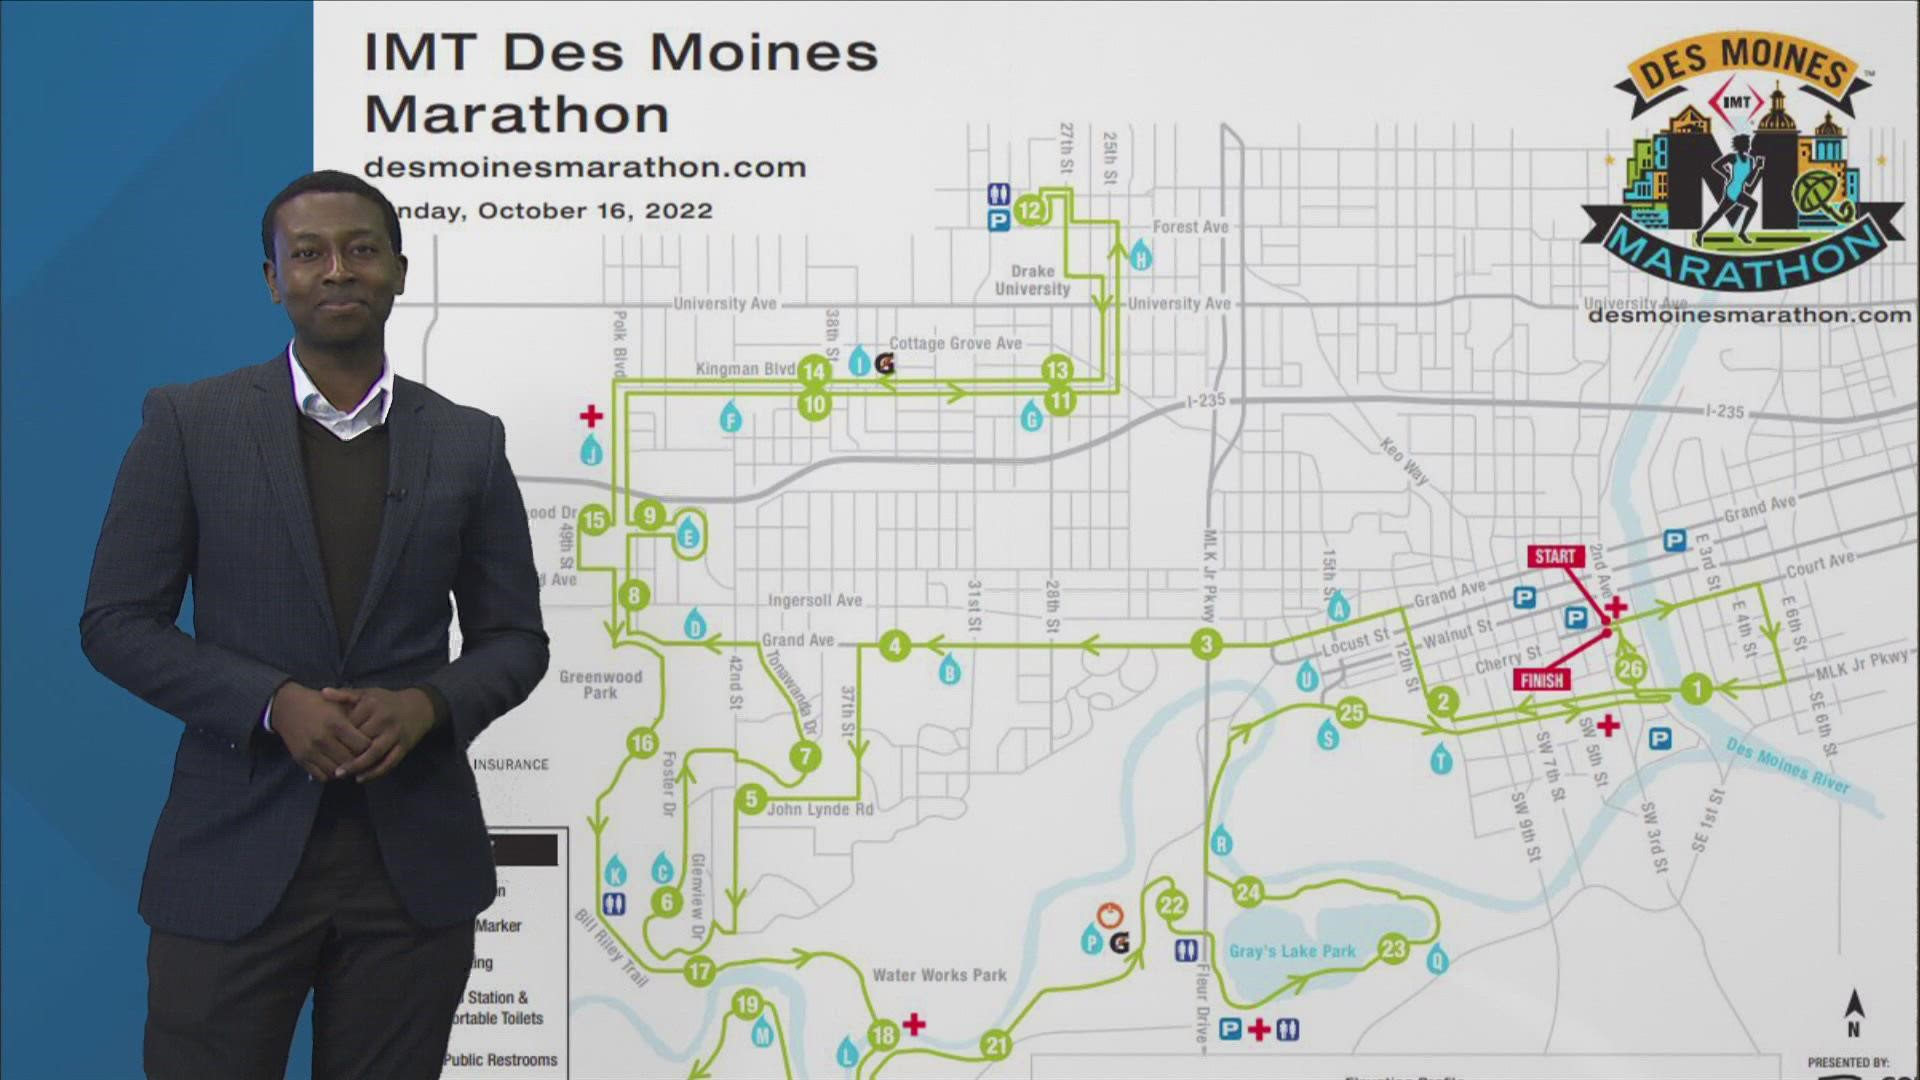 This Sunday, the IMT Des Moines Marathon and other races kick off in the heart of the city. Here are course maps, parking guides and road closures to be aware of.